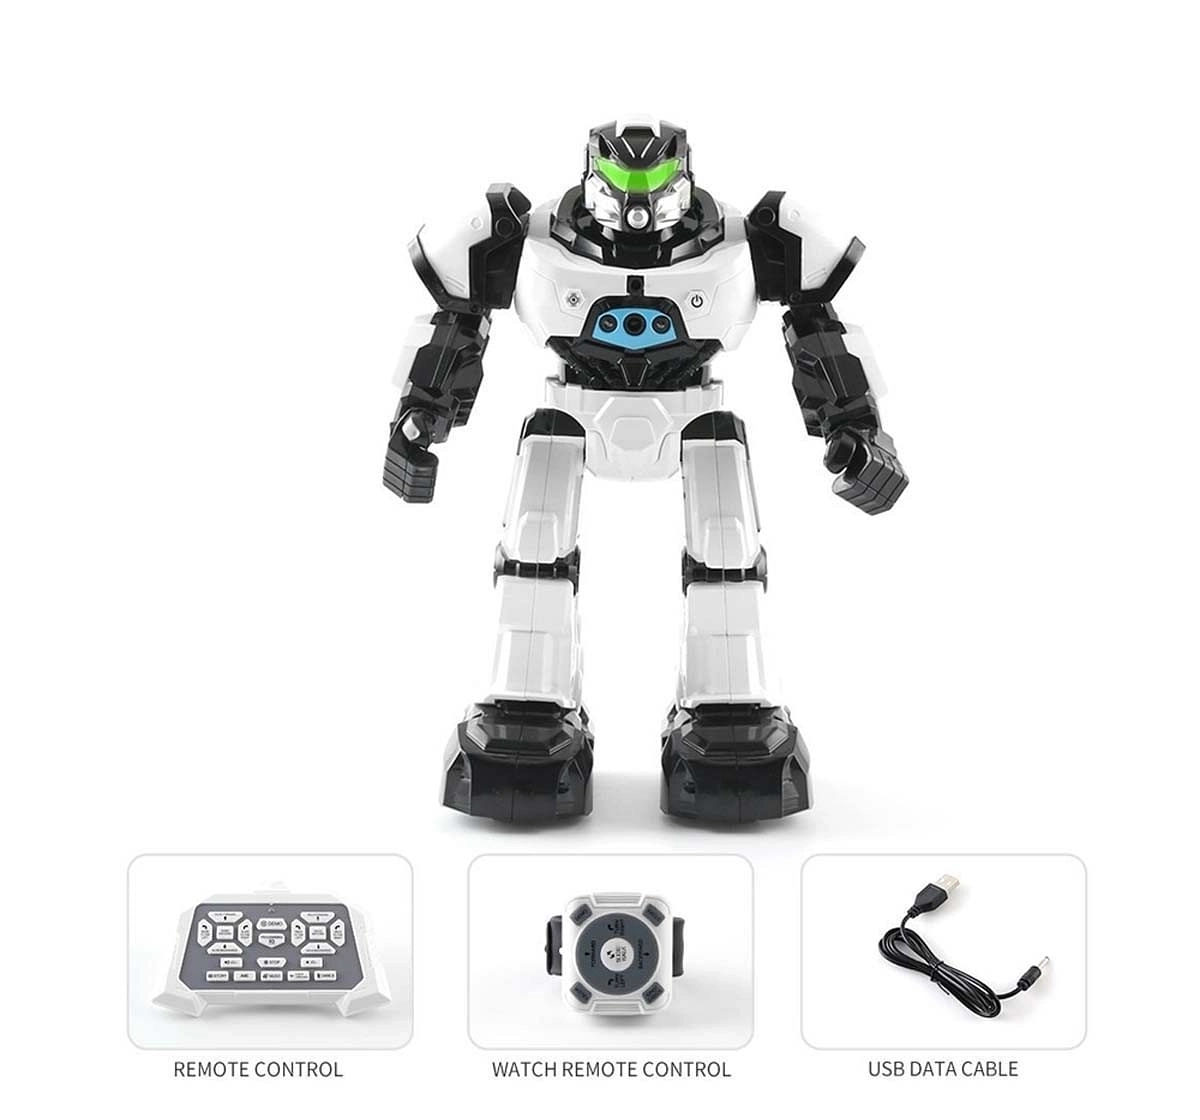 Crazon Smart Watch Enabled Remote Control Robot for Kids Age 8Y+ (Silver)